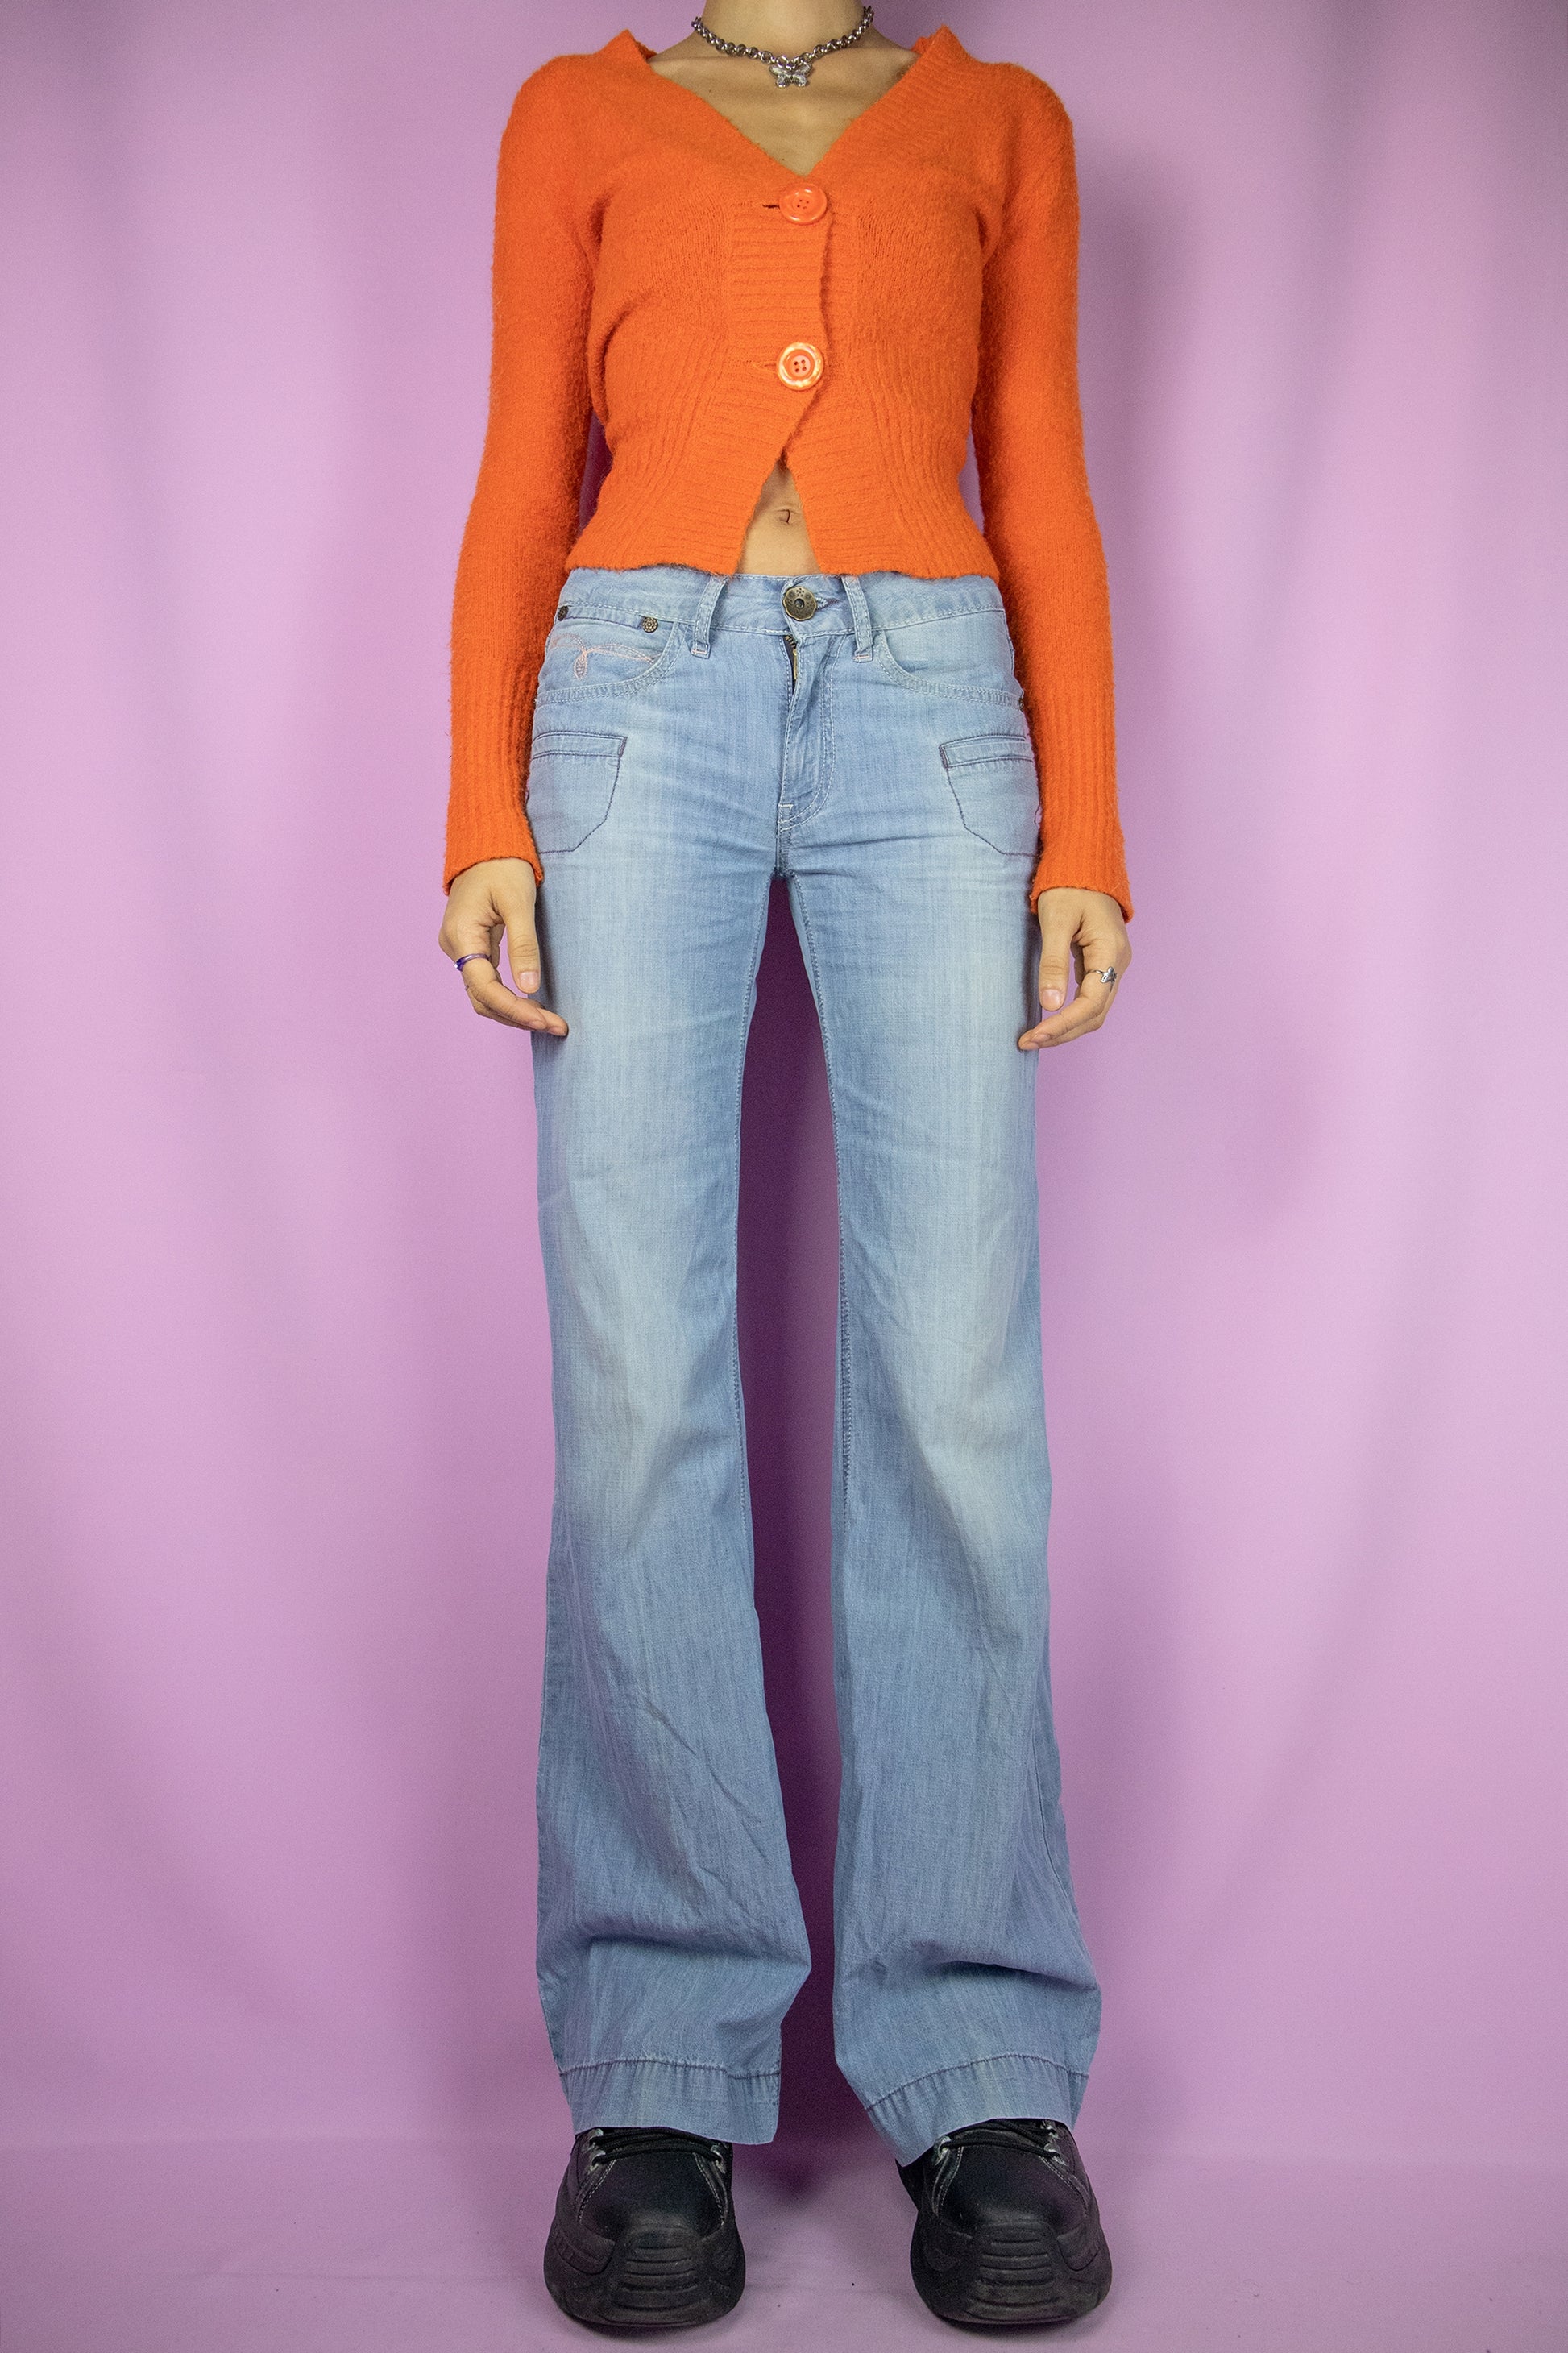 The Y2K Flare Low Rise Jeans are vintage 2000s light blue denim wide-leg pants with pockets and a zipper closure.